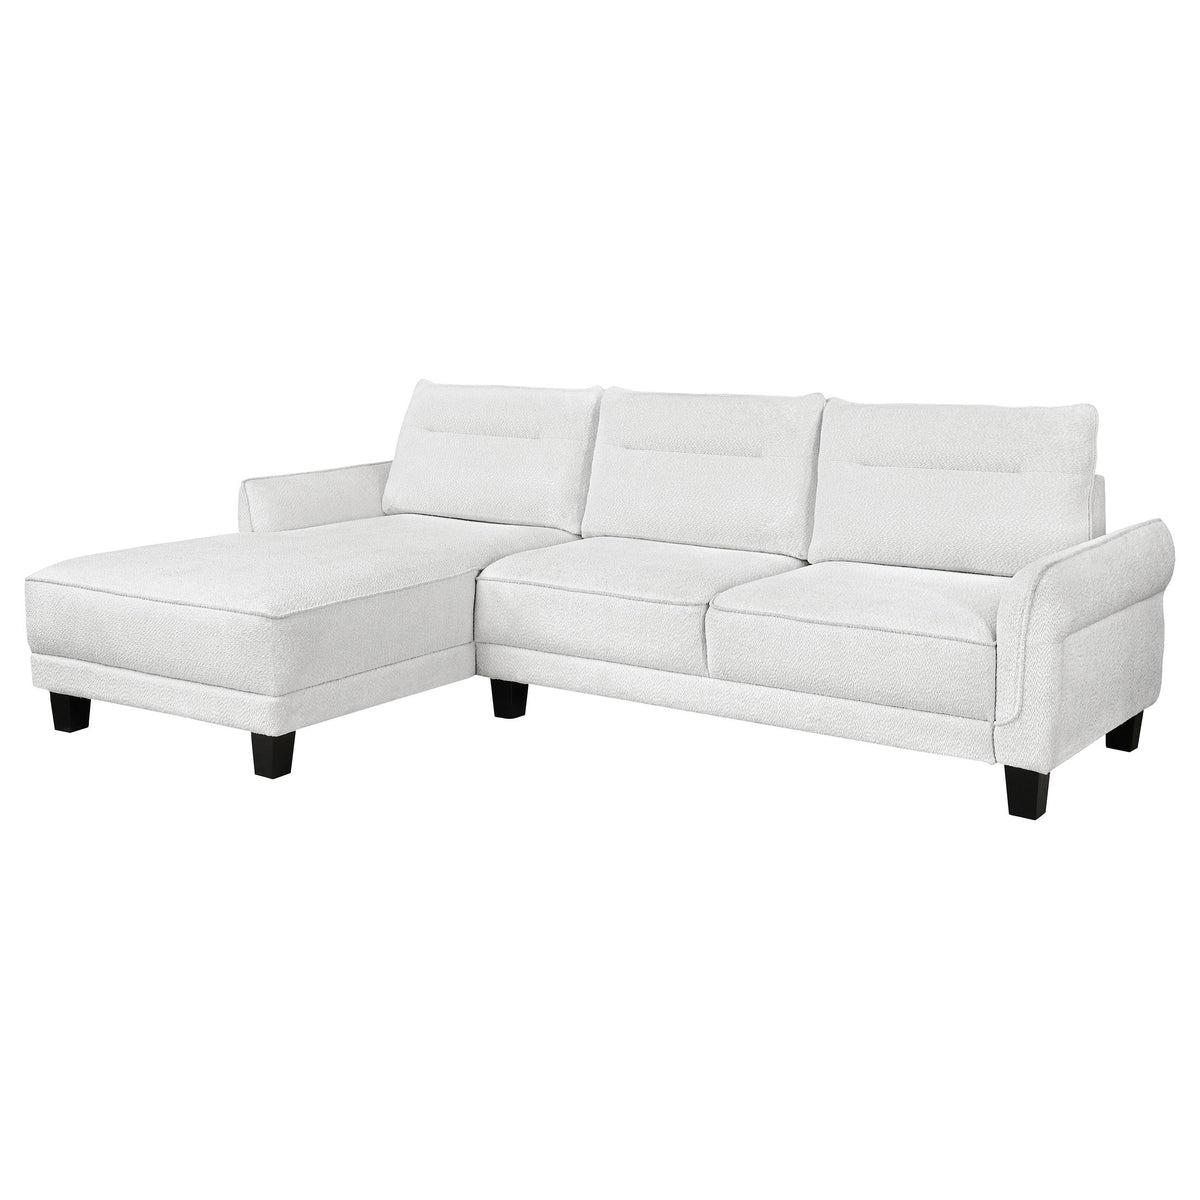 Caspian Upholstered Curved Arms Sectional Sofa  Las Vegas Furniture Stores